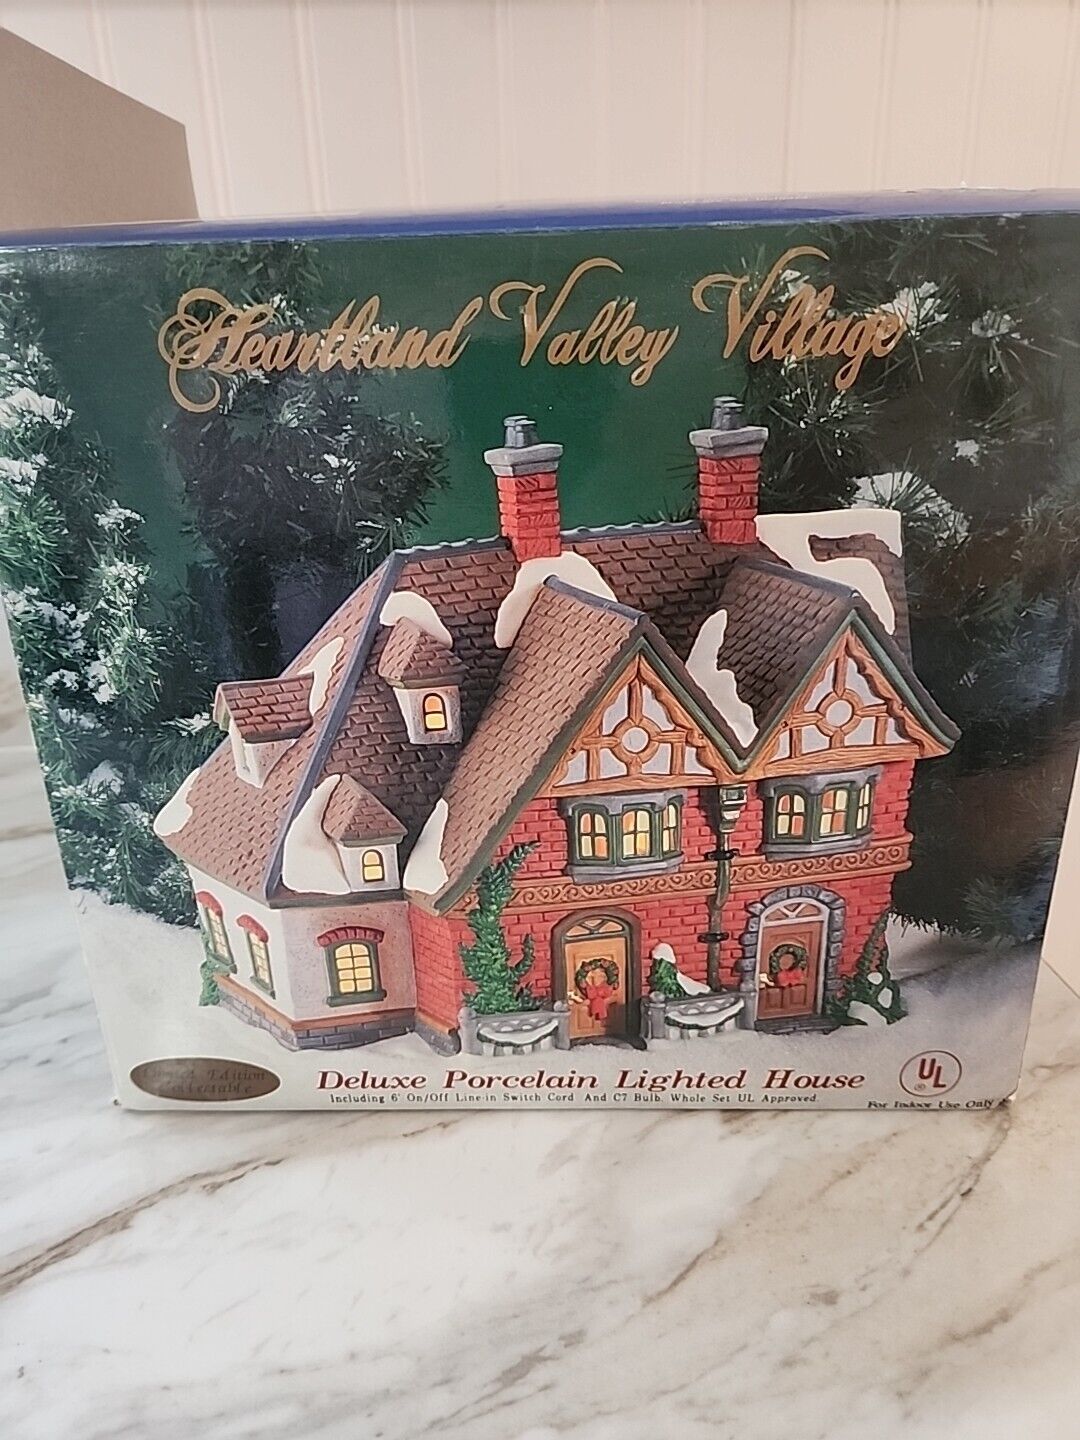 Heartland Valley Village Deluxe Porcelain Lighted House 